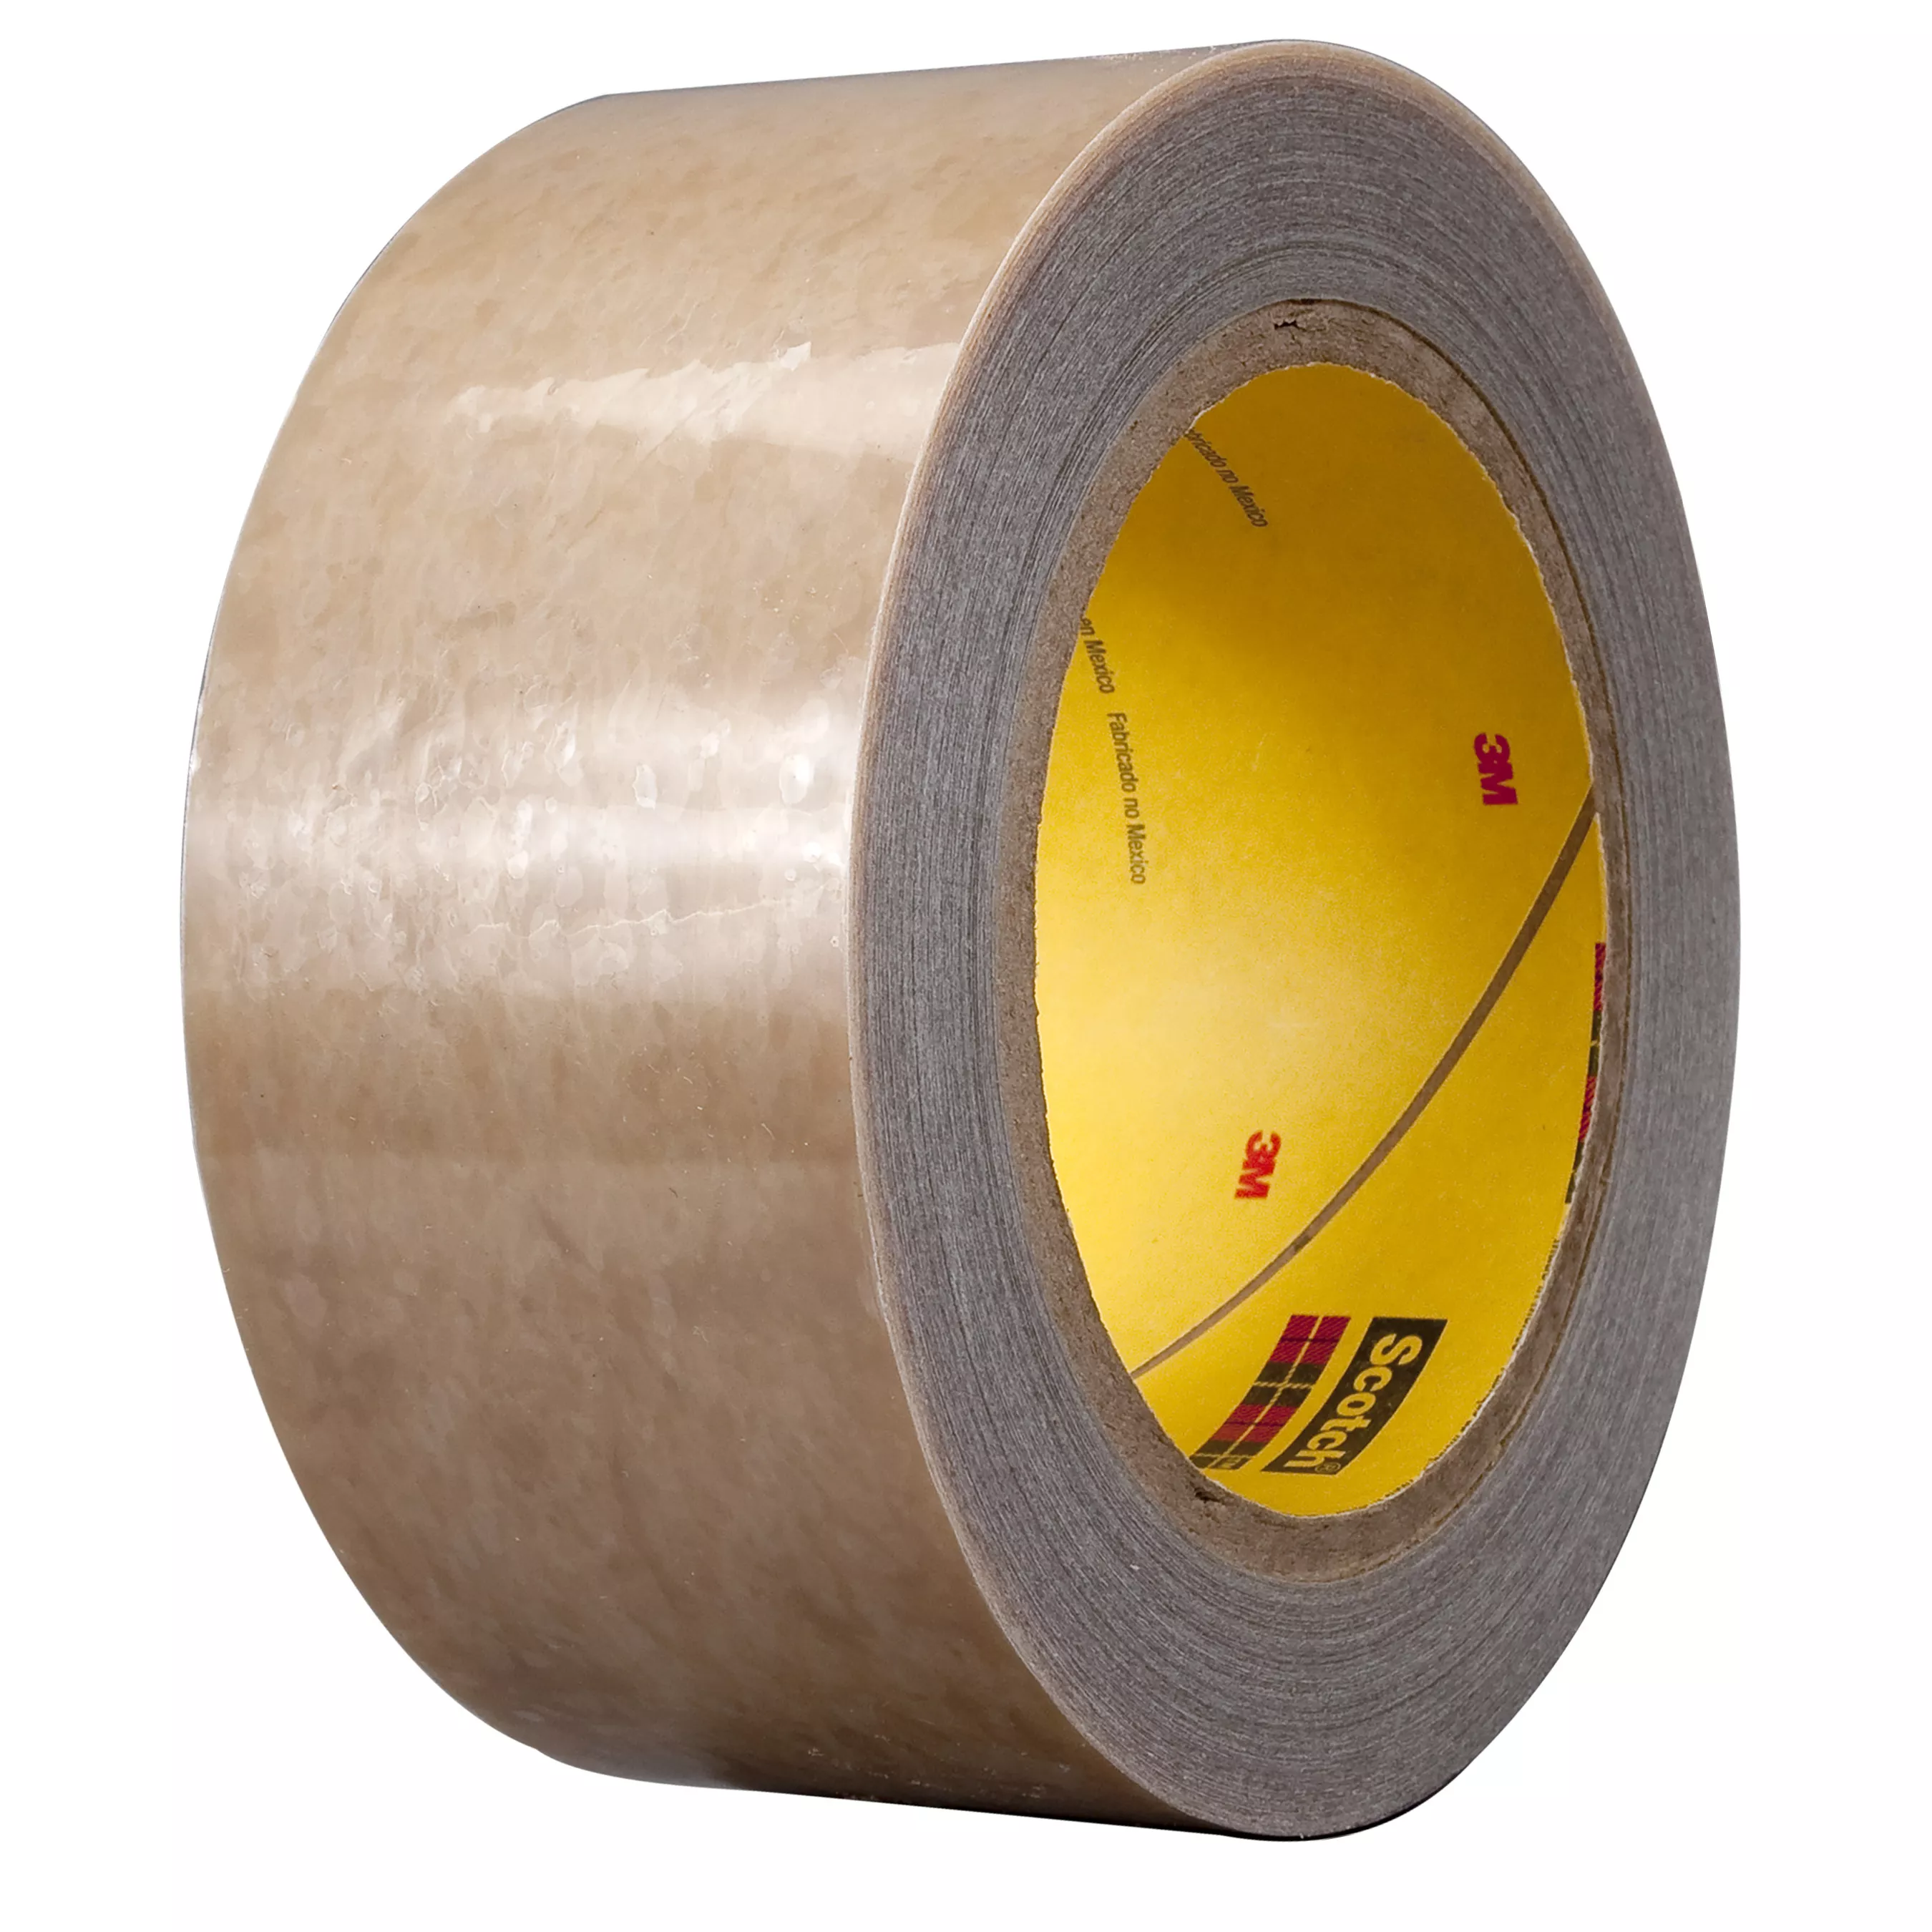 3M™ Polyester Protective Tape 336, Transparent, 12 in x 144 yd, 1.5 mil,
1 roll per case